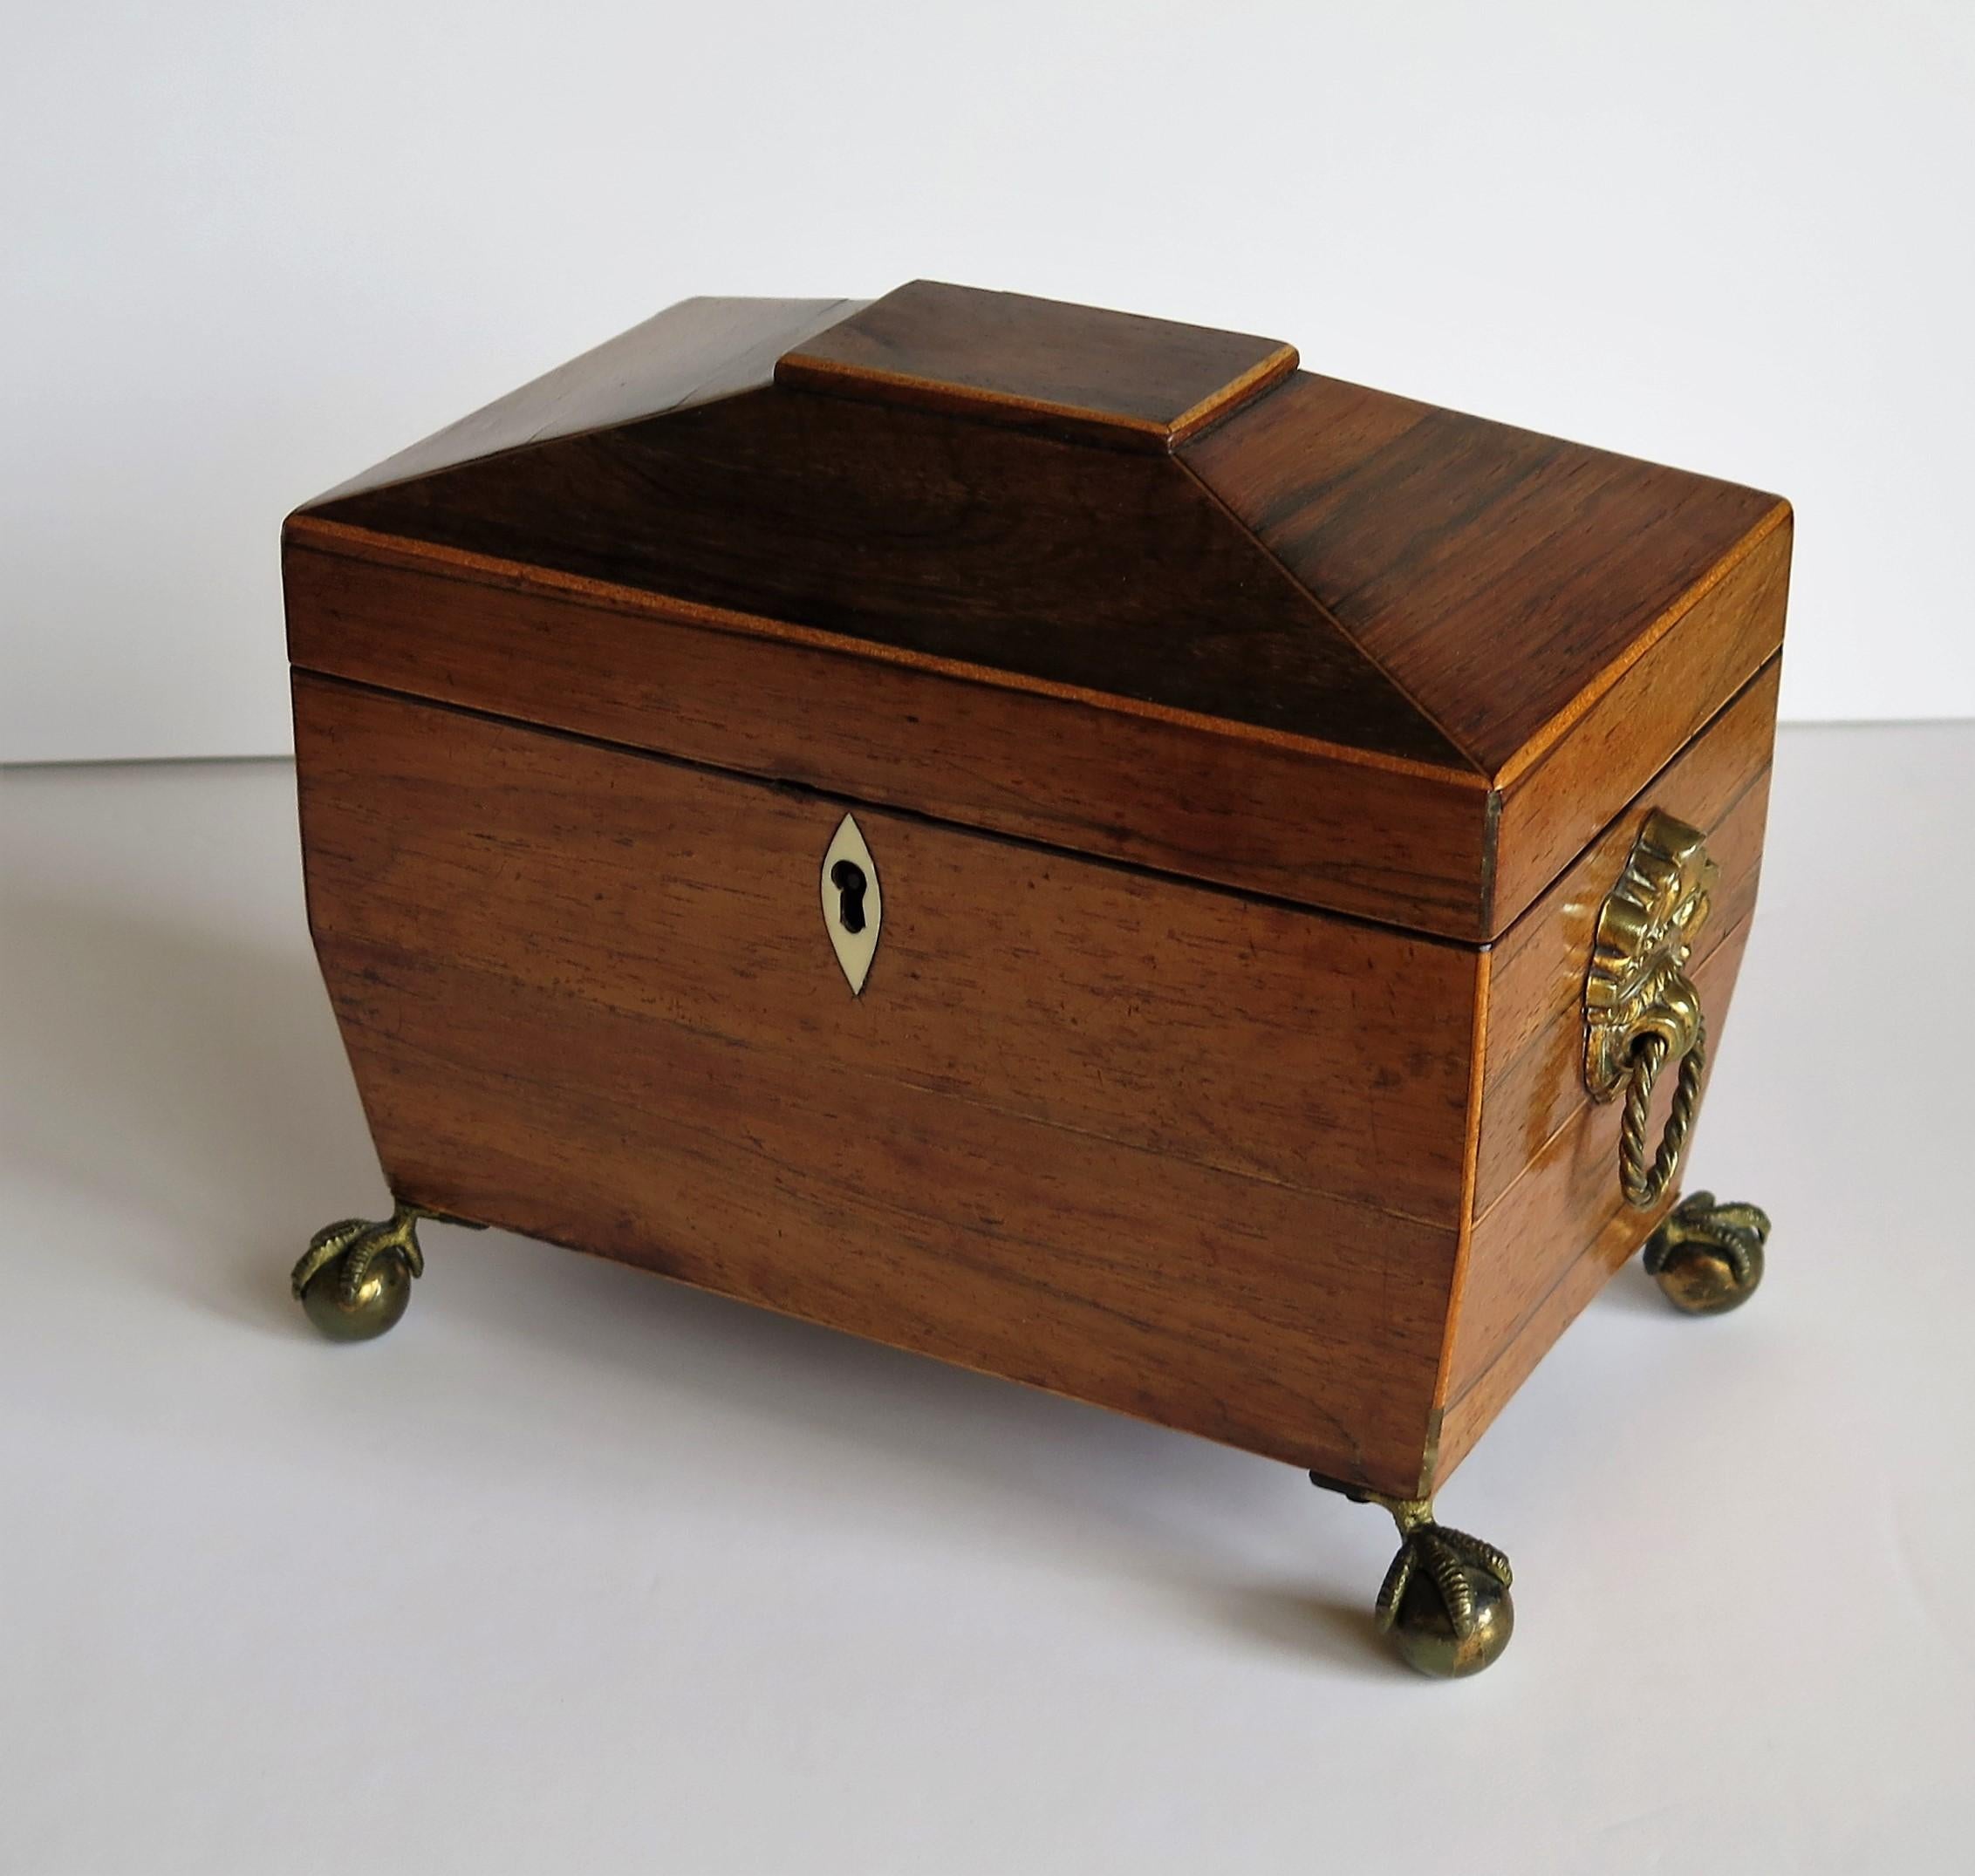 This is a good, high quality, English, Georgian period tea caddy, circa 1815.

The tea caddy has a sarcophagus shape with two lidded internal compartments.
It has been very carefully hand made of various contrasting woods. The main body is